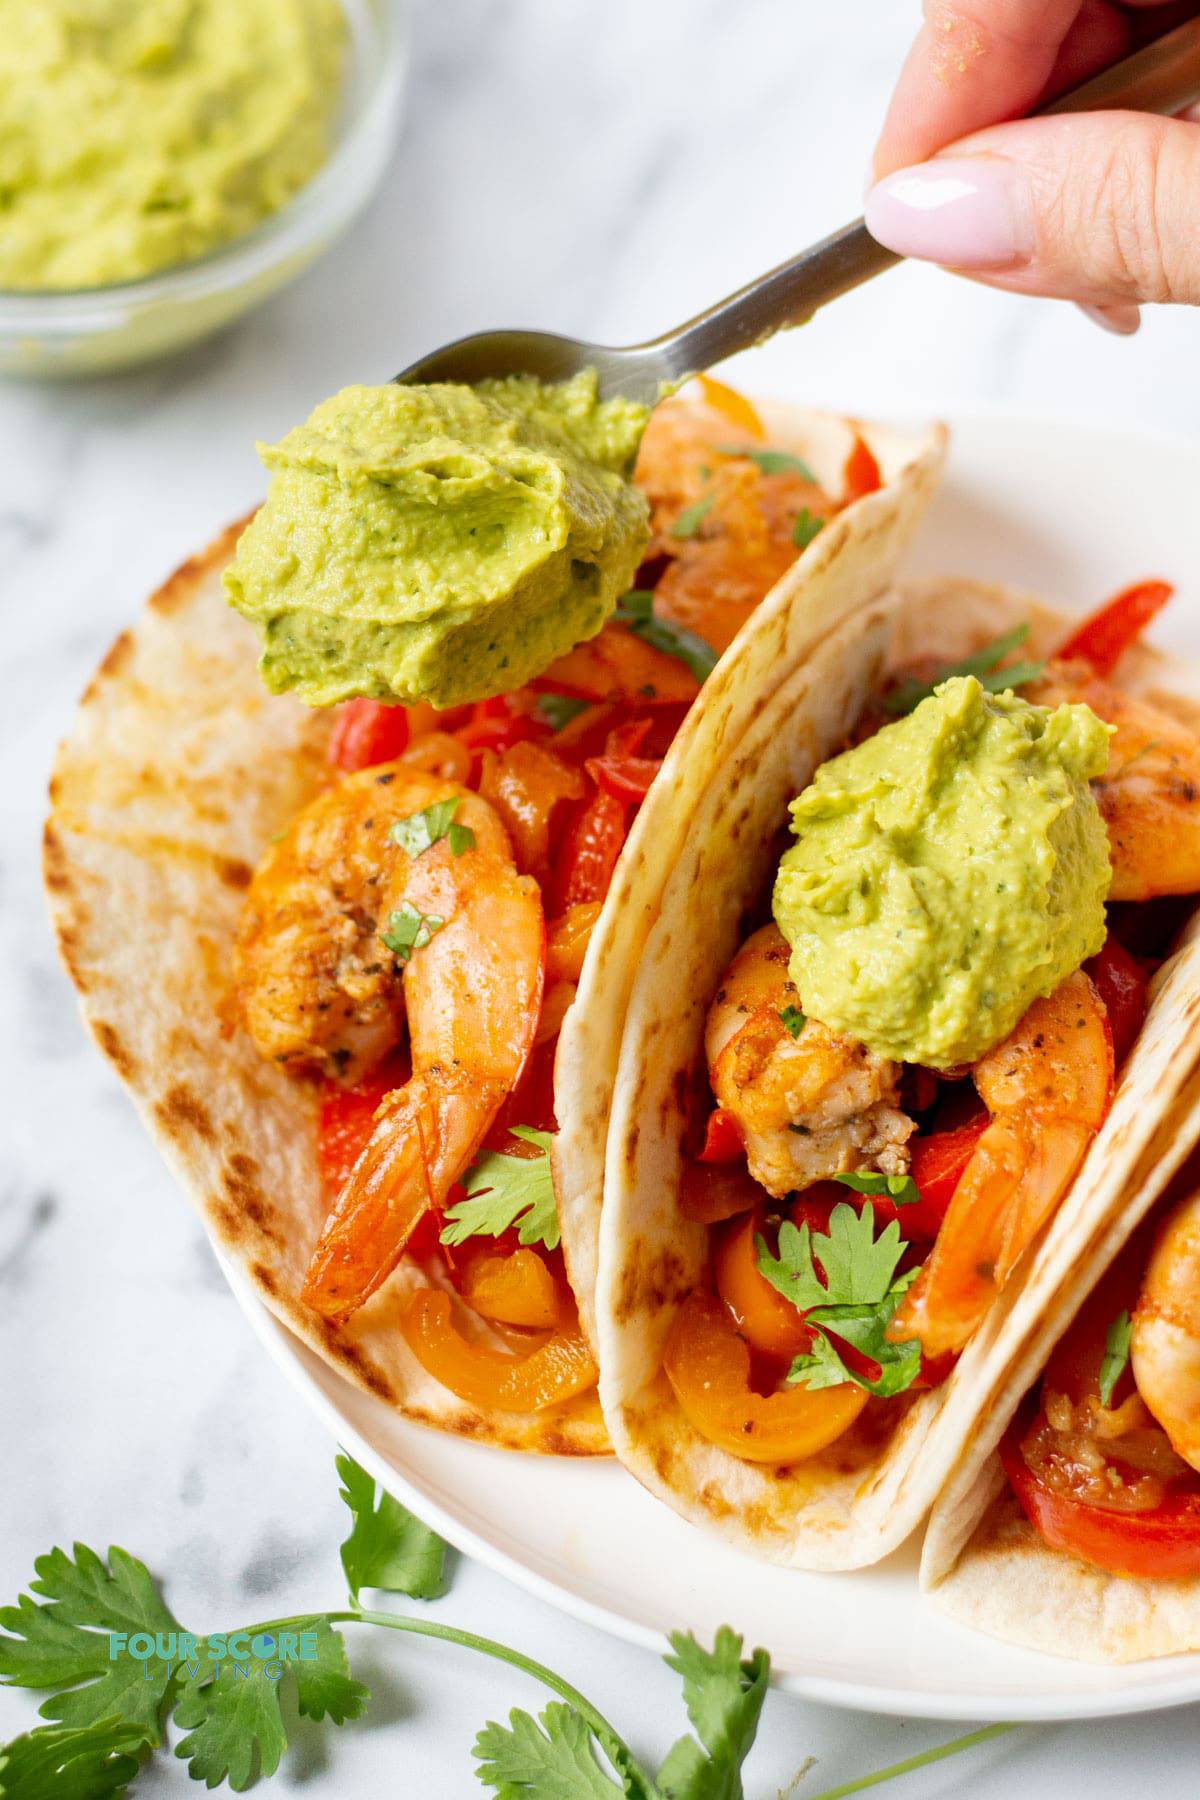 Three shrimp tacos in flour tortillas. A hand is adding dollops of avocado crema to the top of each